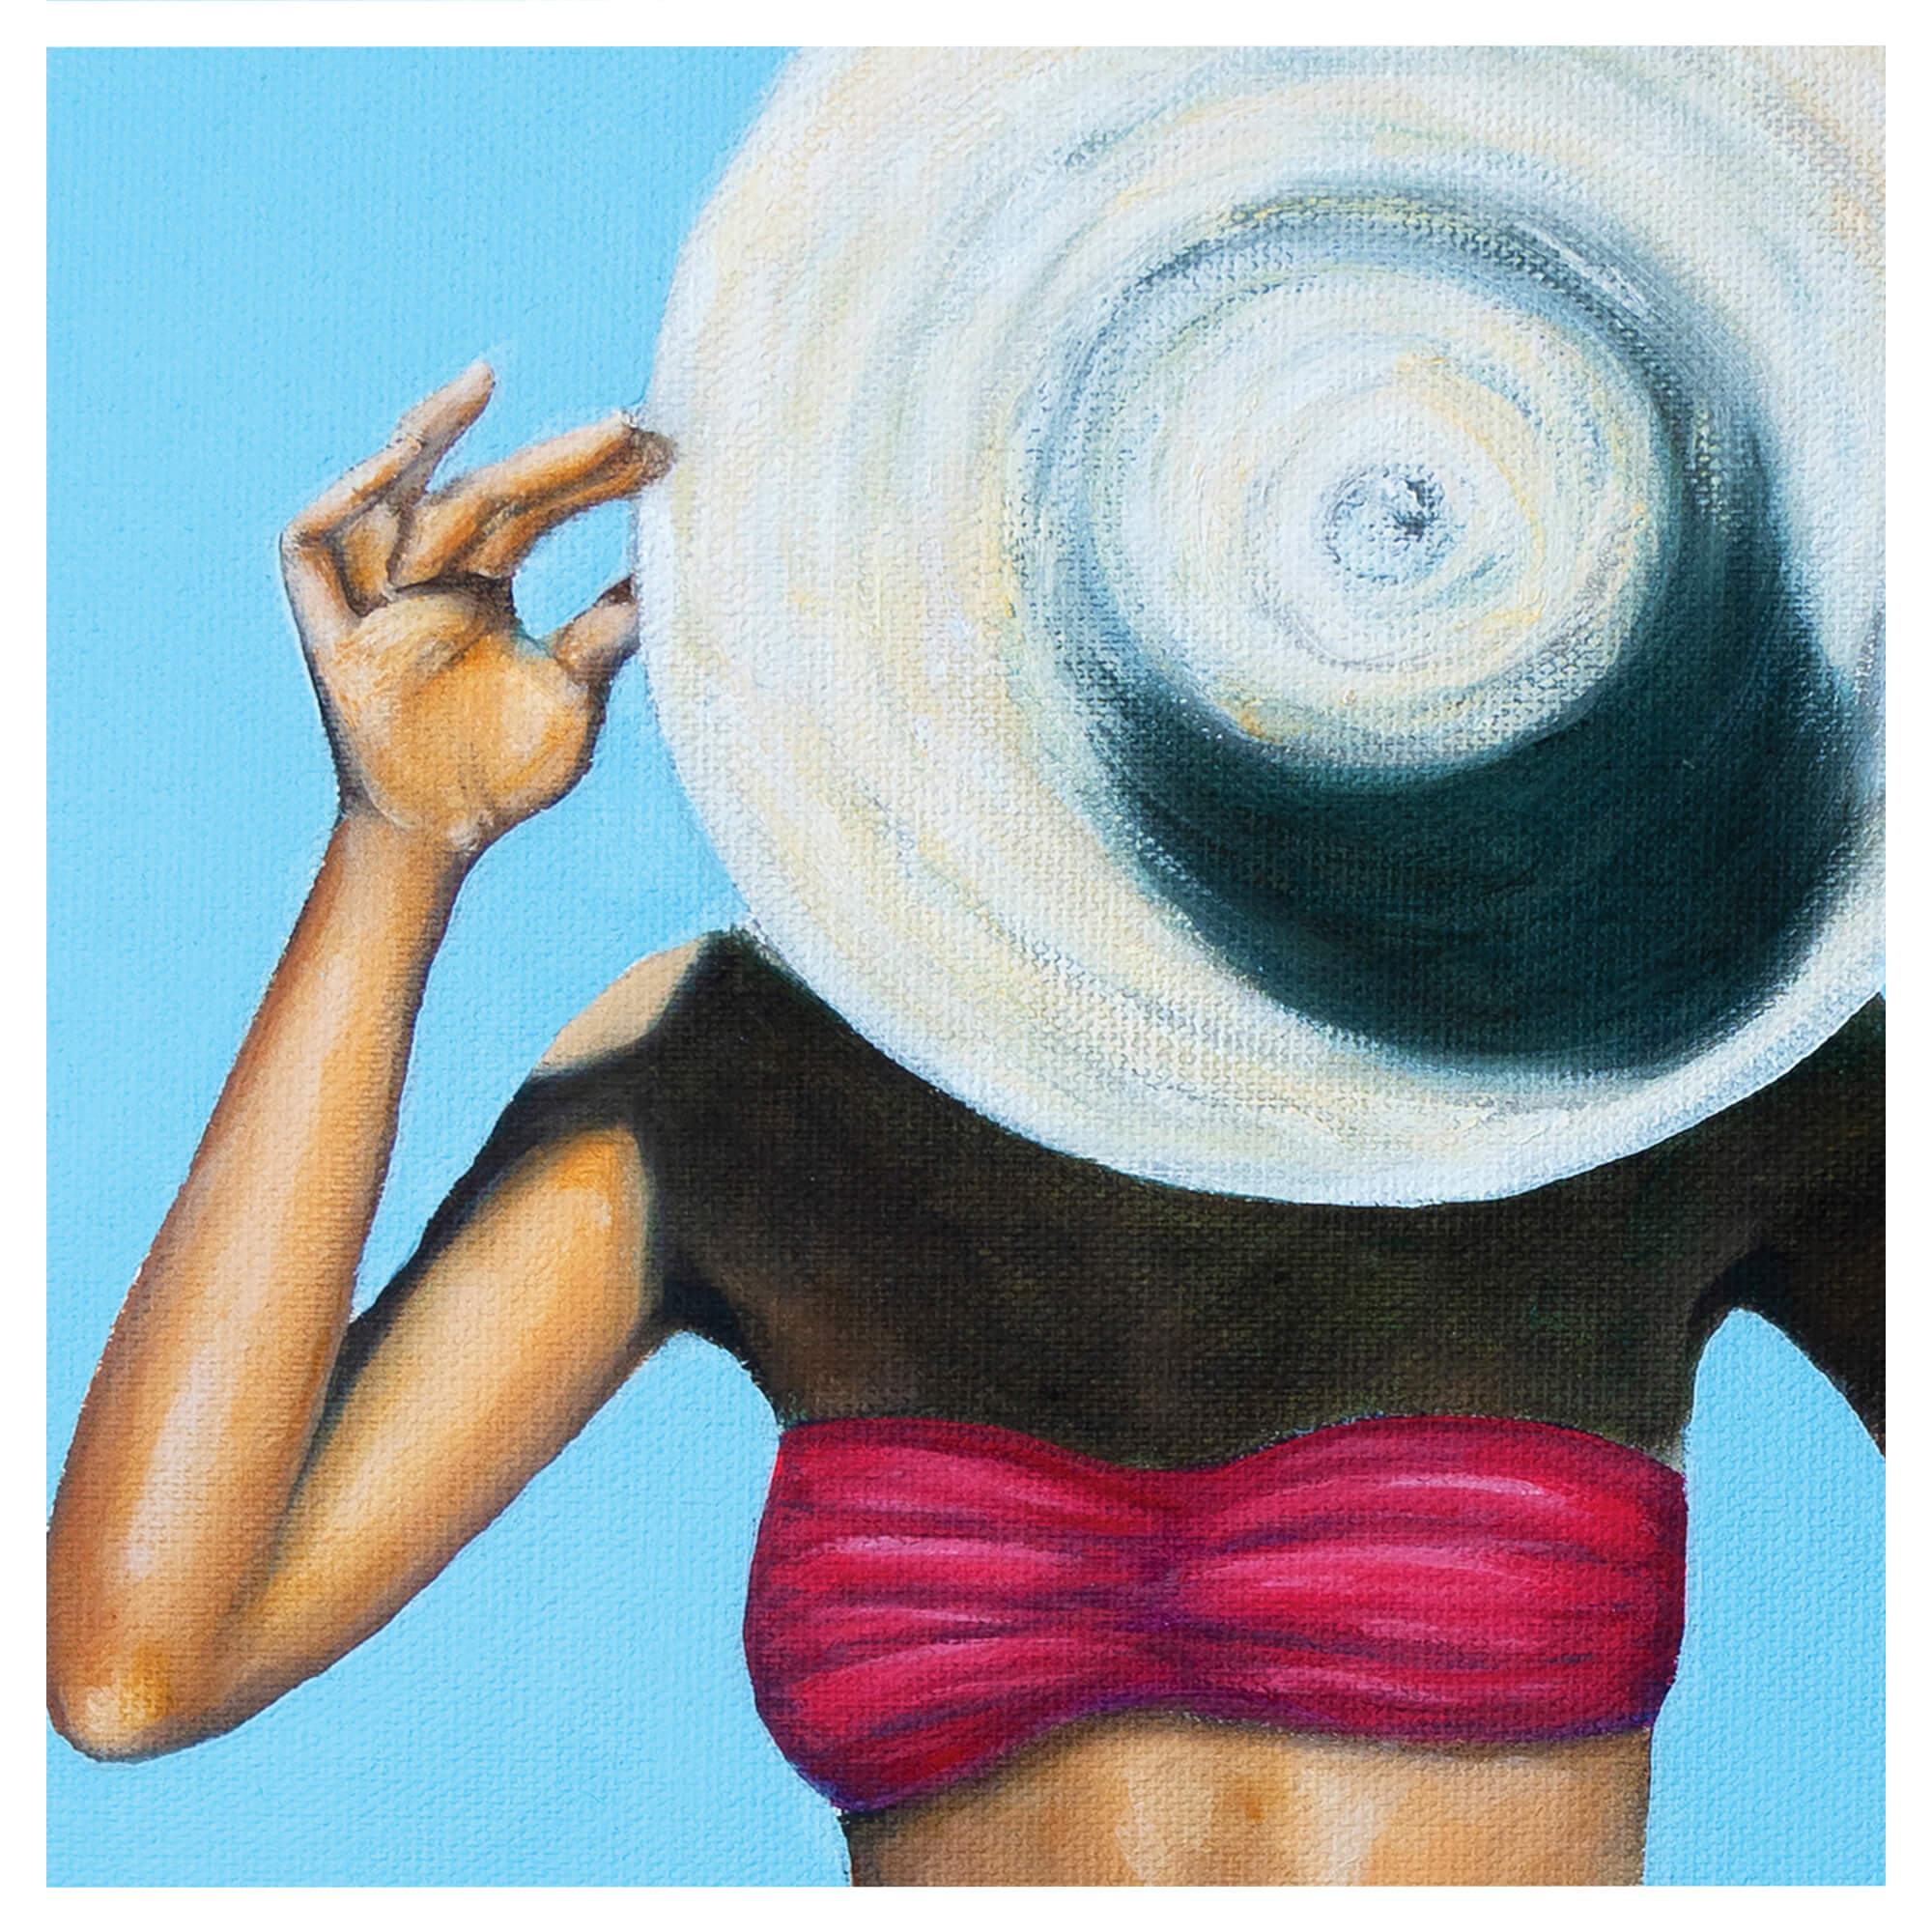 A painting of a woman holding her hat by Hawaii artist Kelly Keane